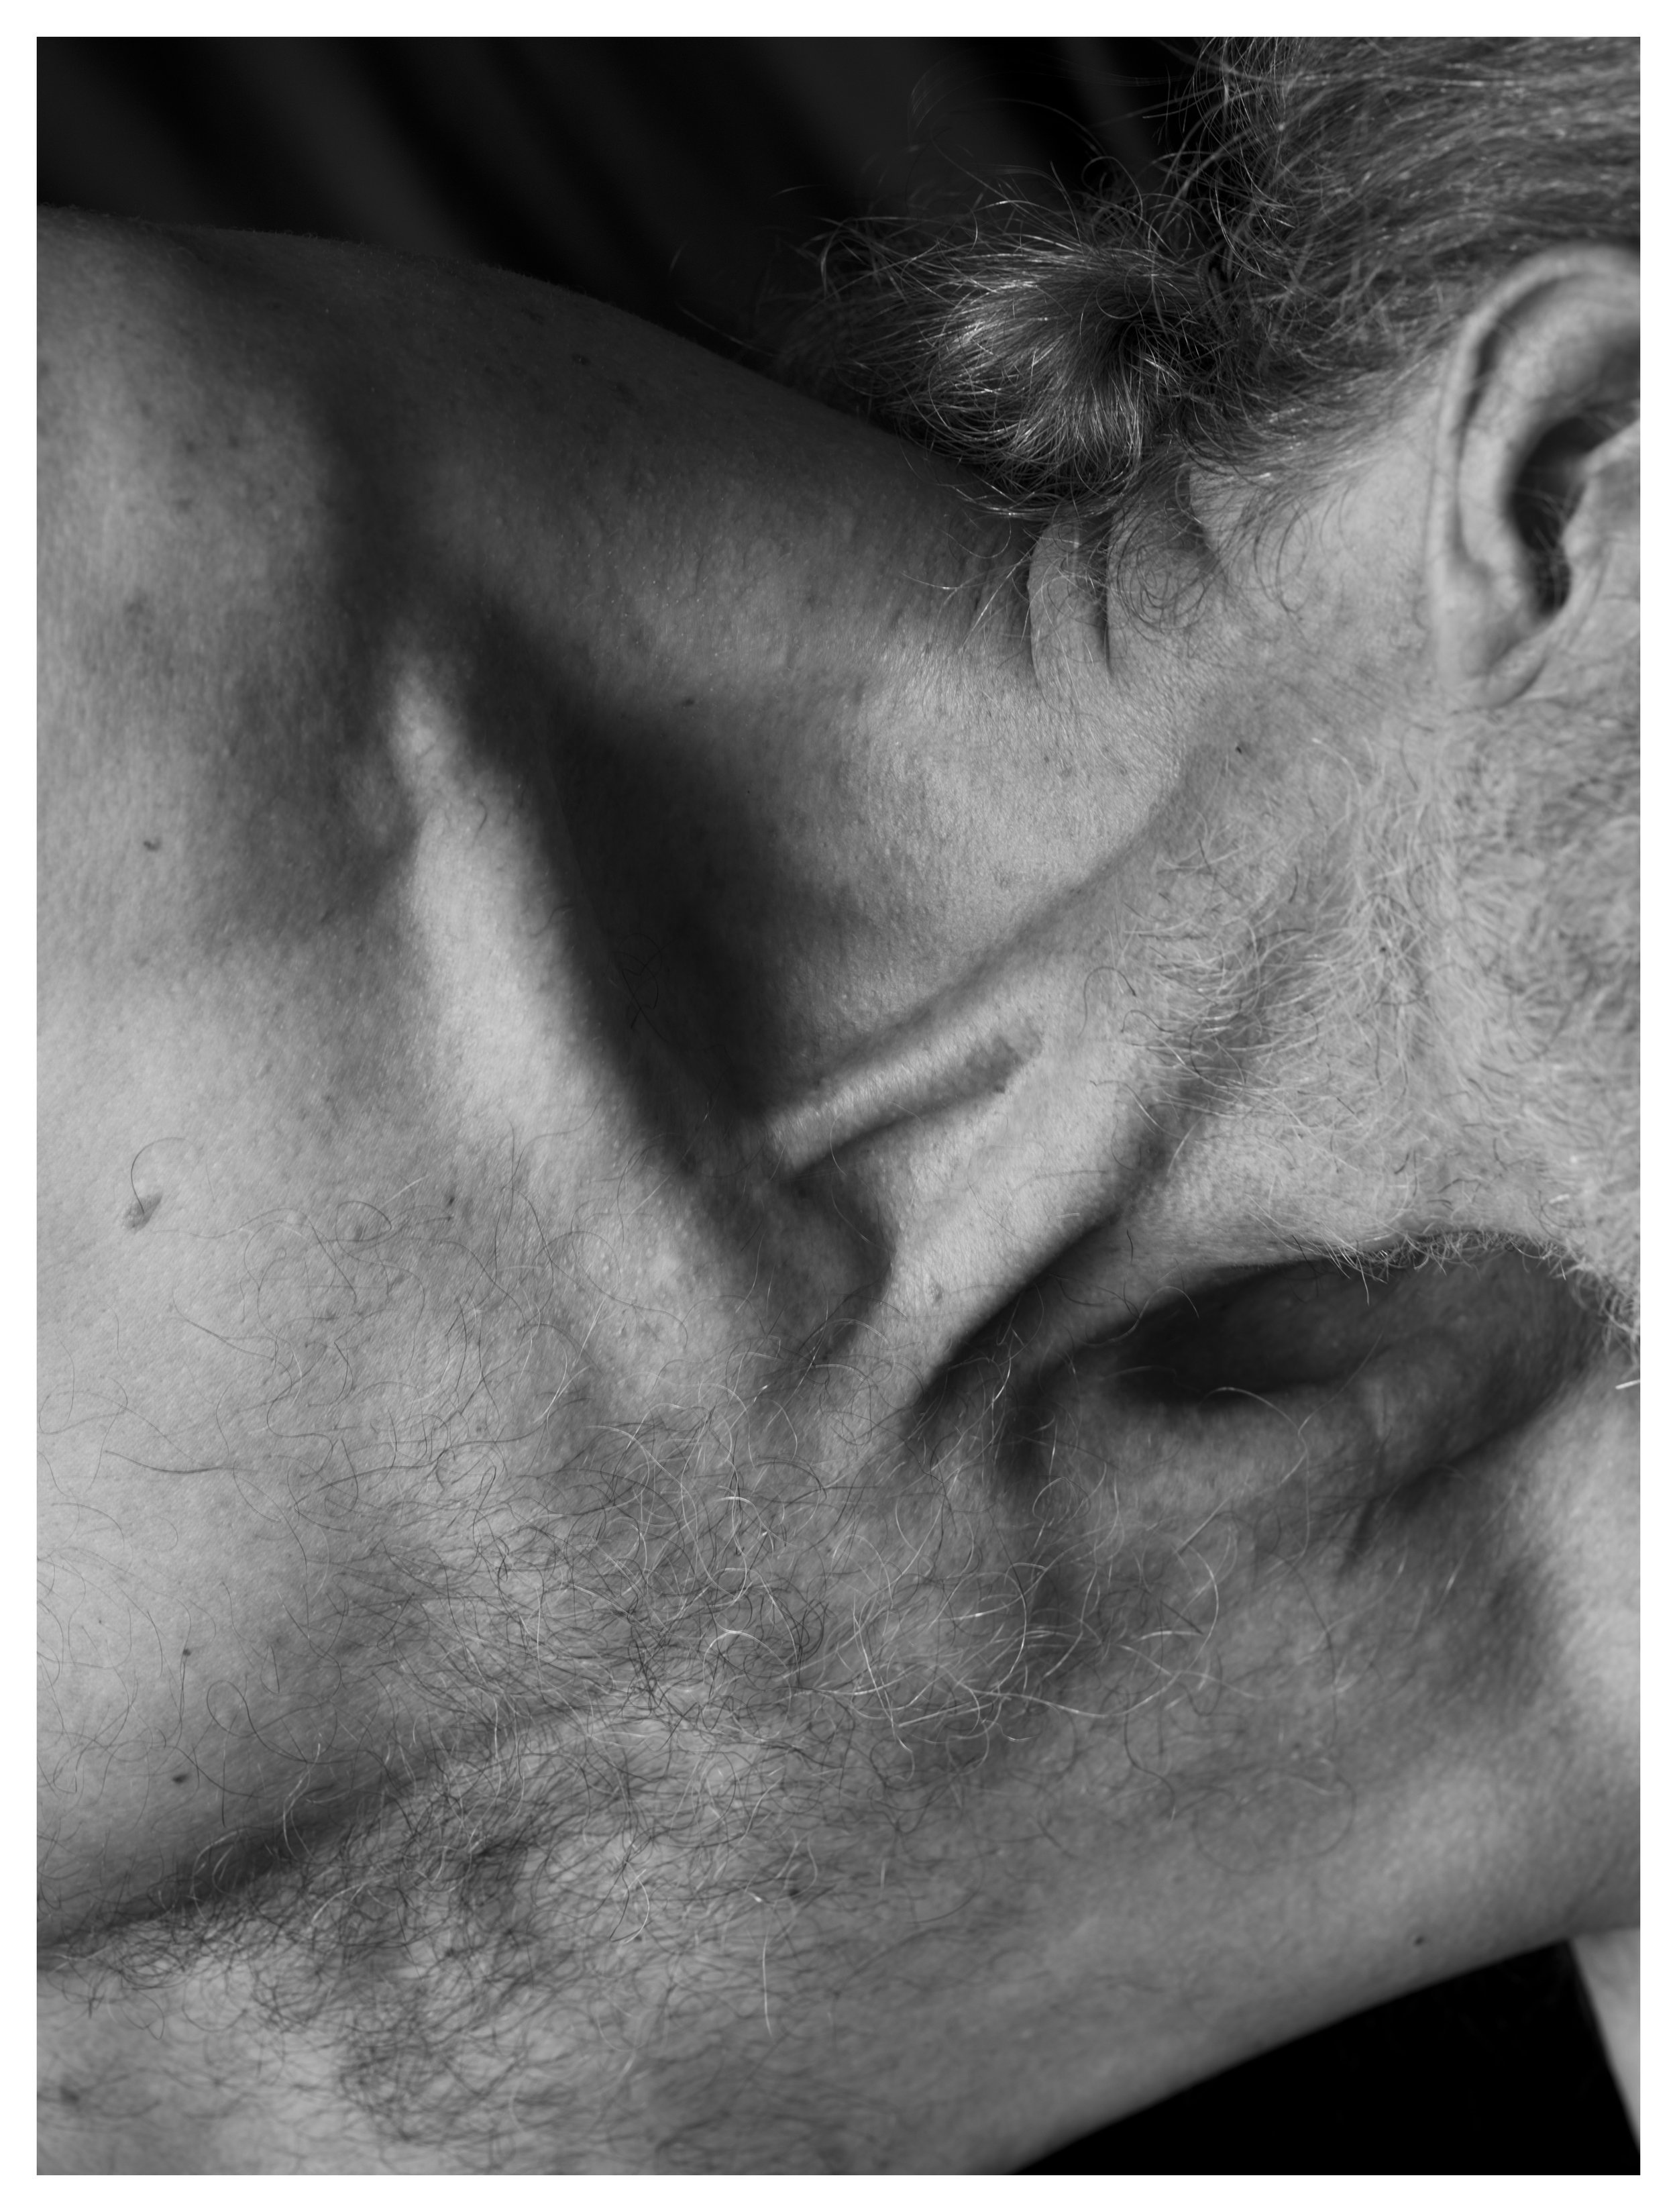 From series Men Untitled.